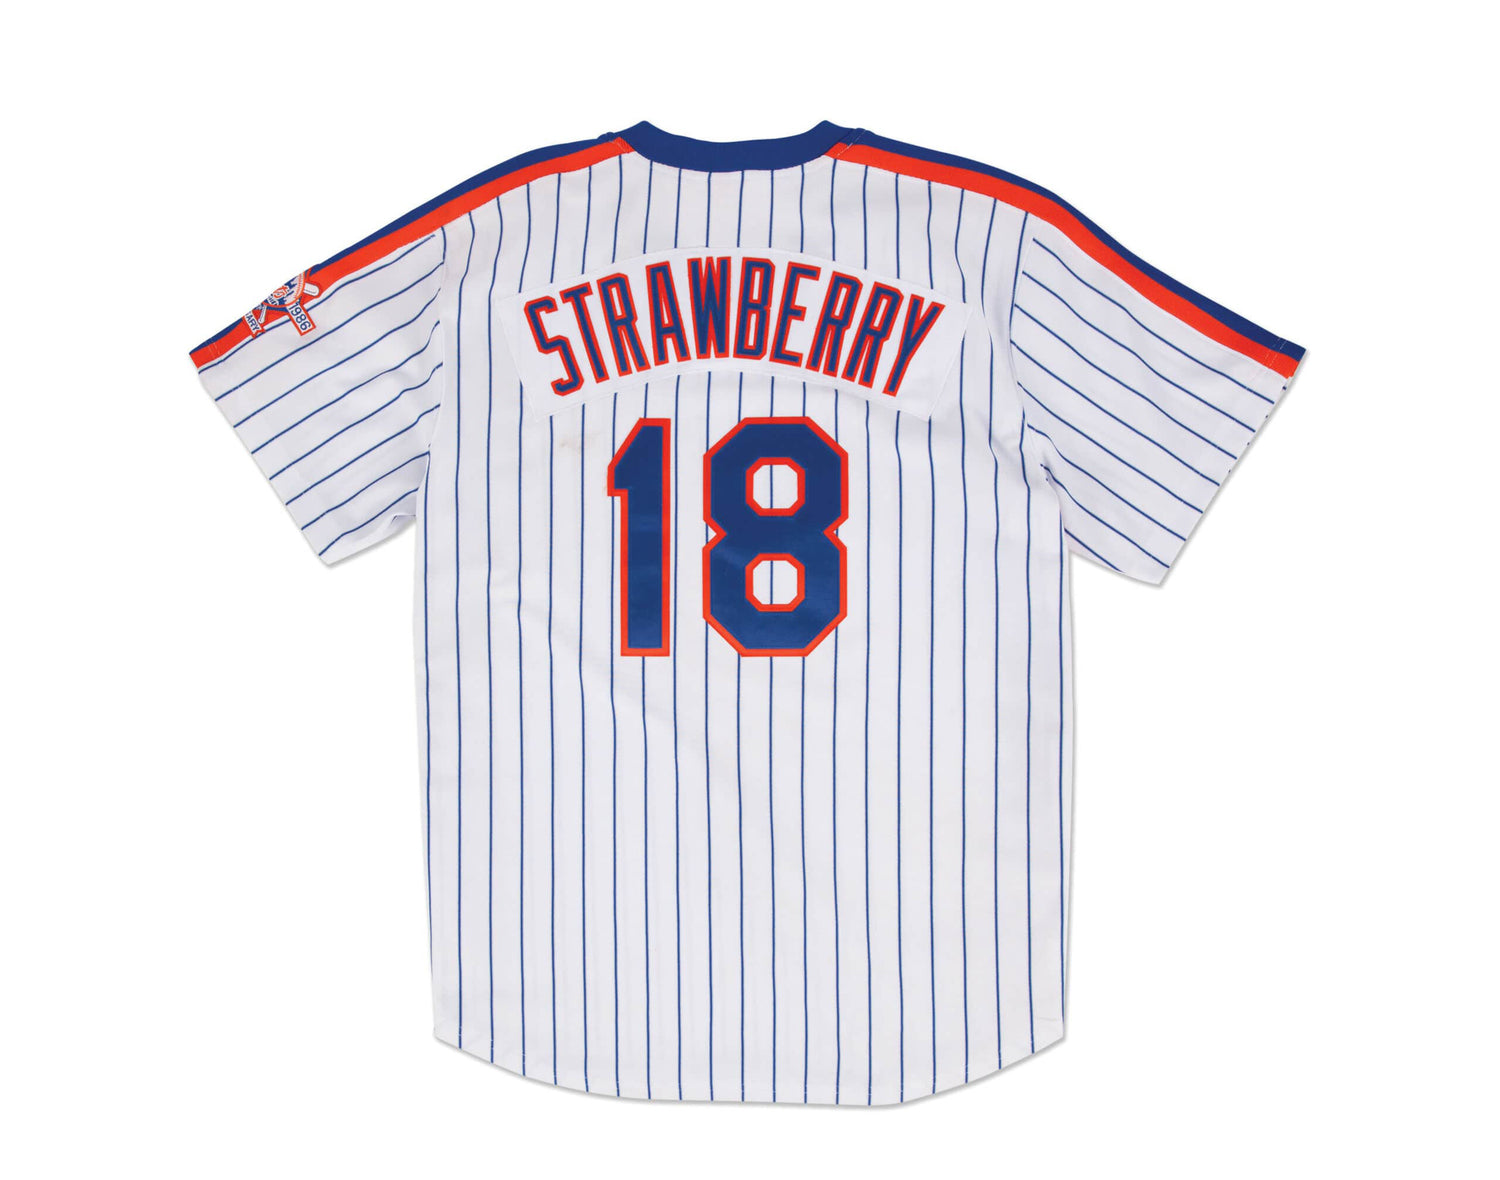 Mitchell & Ness Authentic New York Mets Home 1986 Darryl Strawberry Jersey